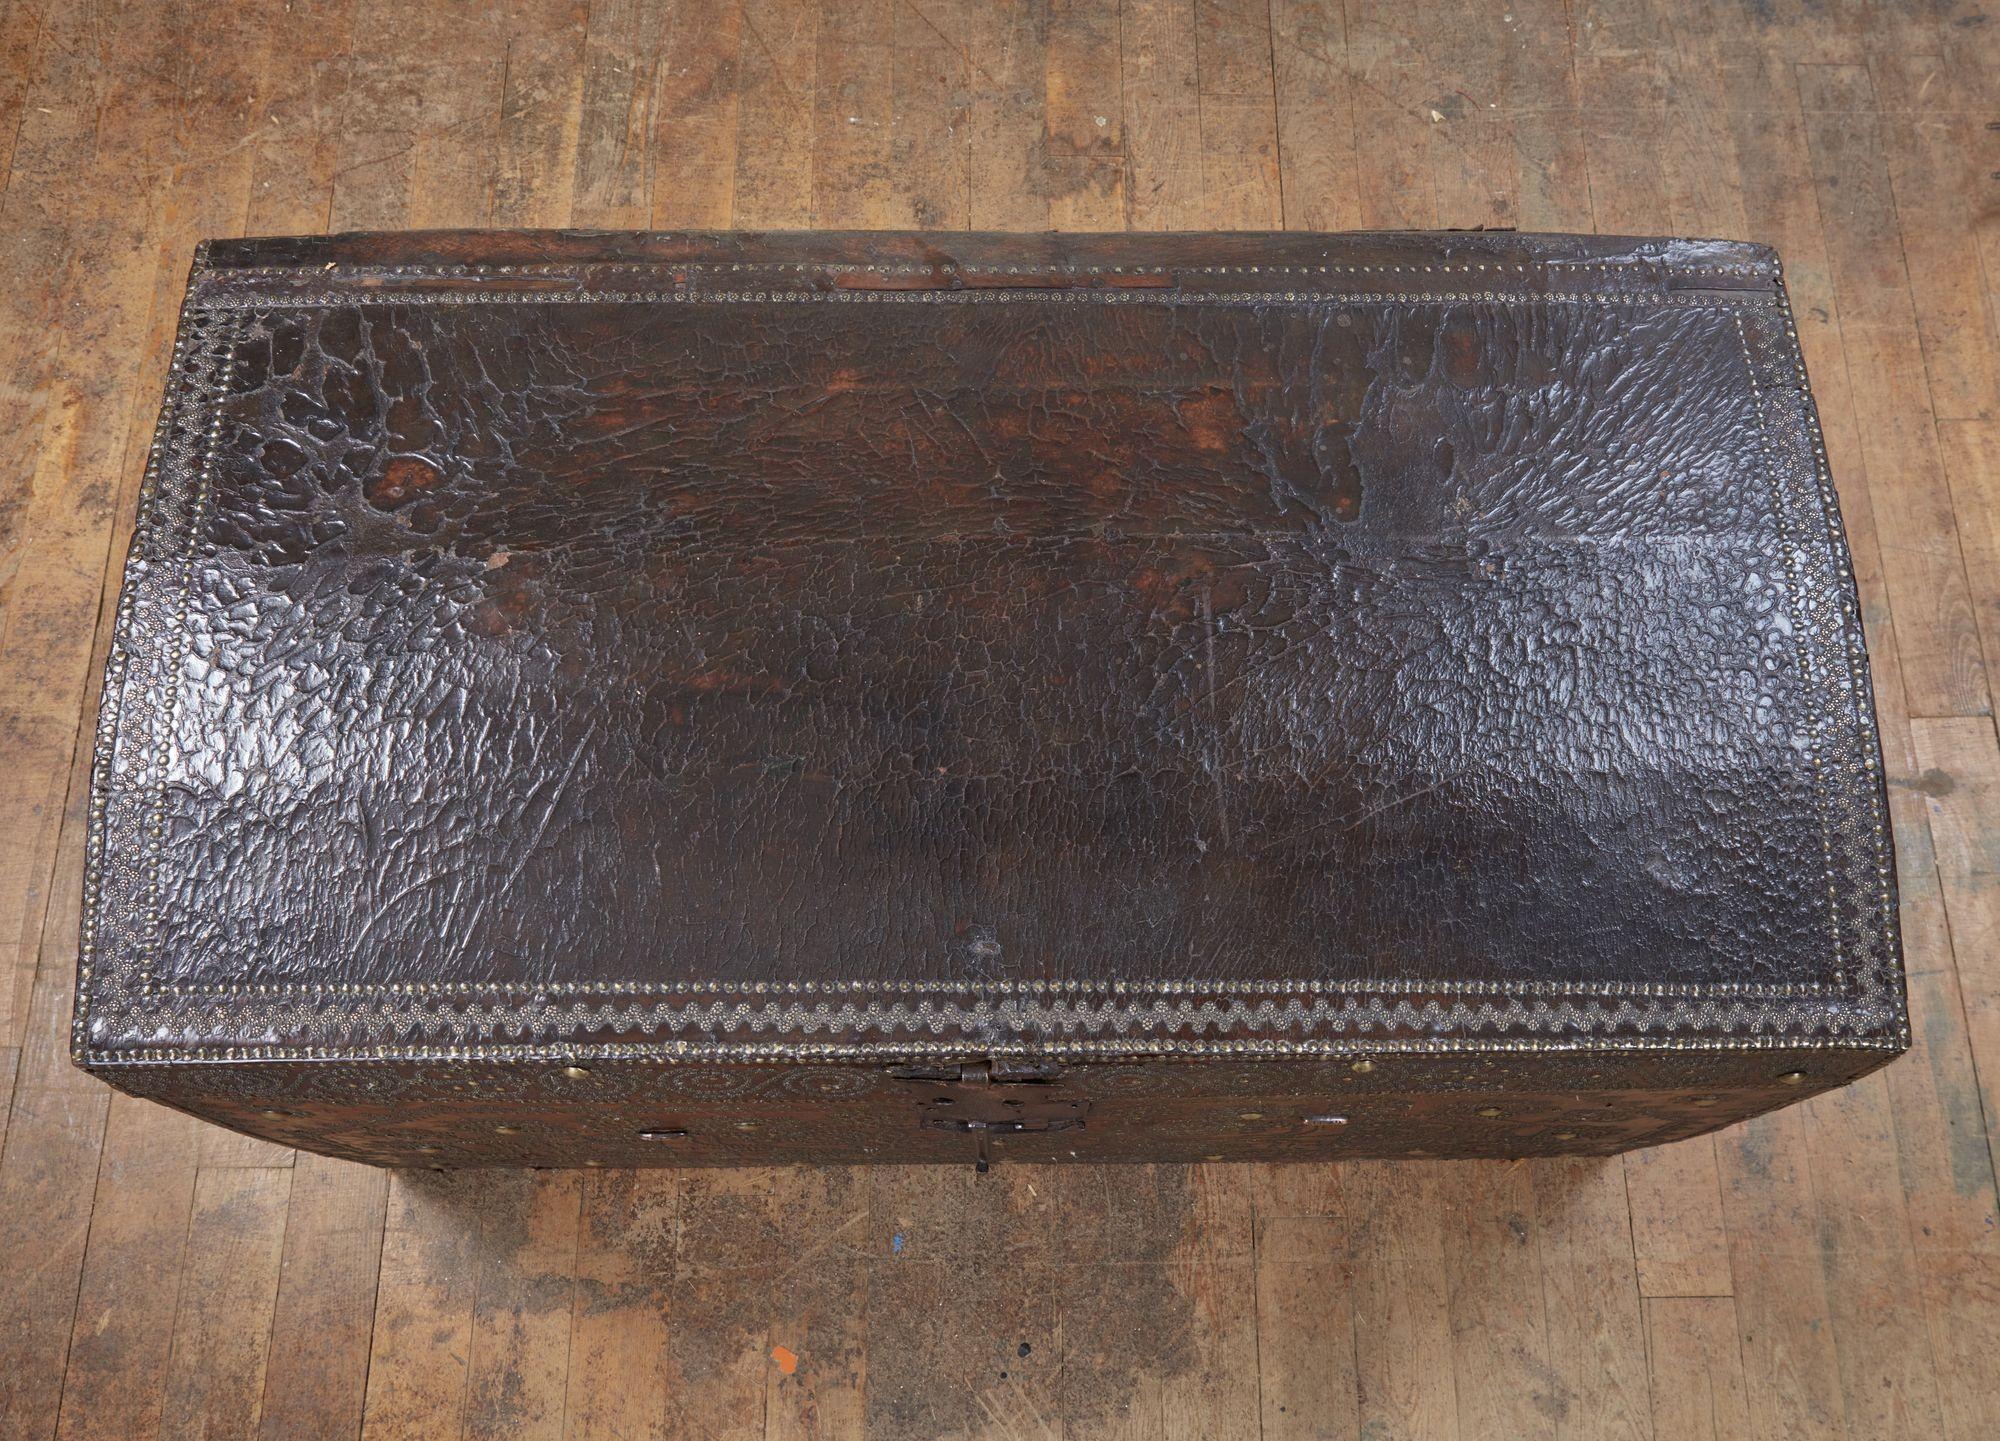 Studded Leather Travel Chest In Good Condition For Sale In Greenwich, CT